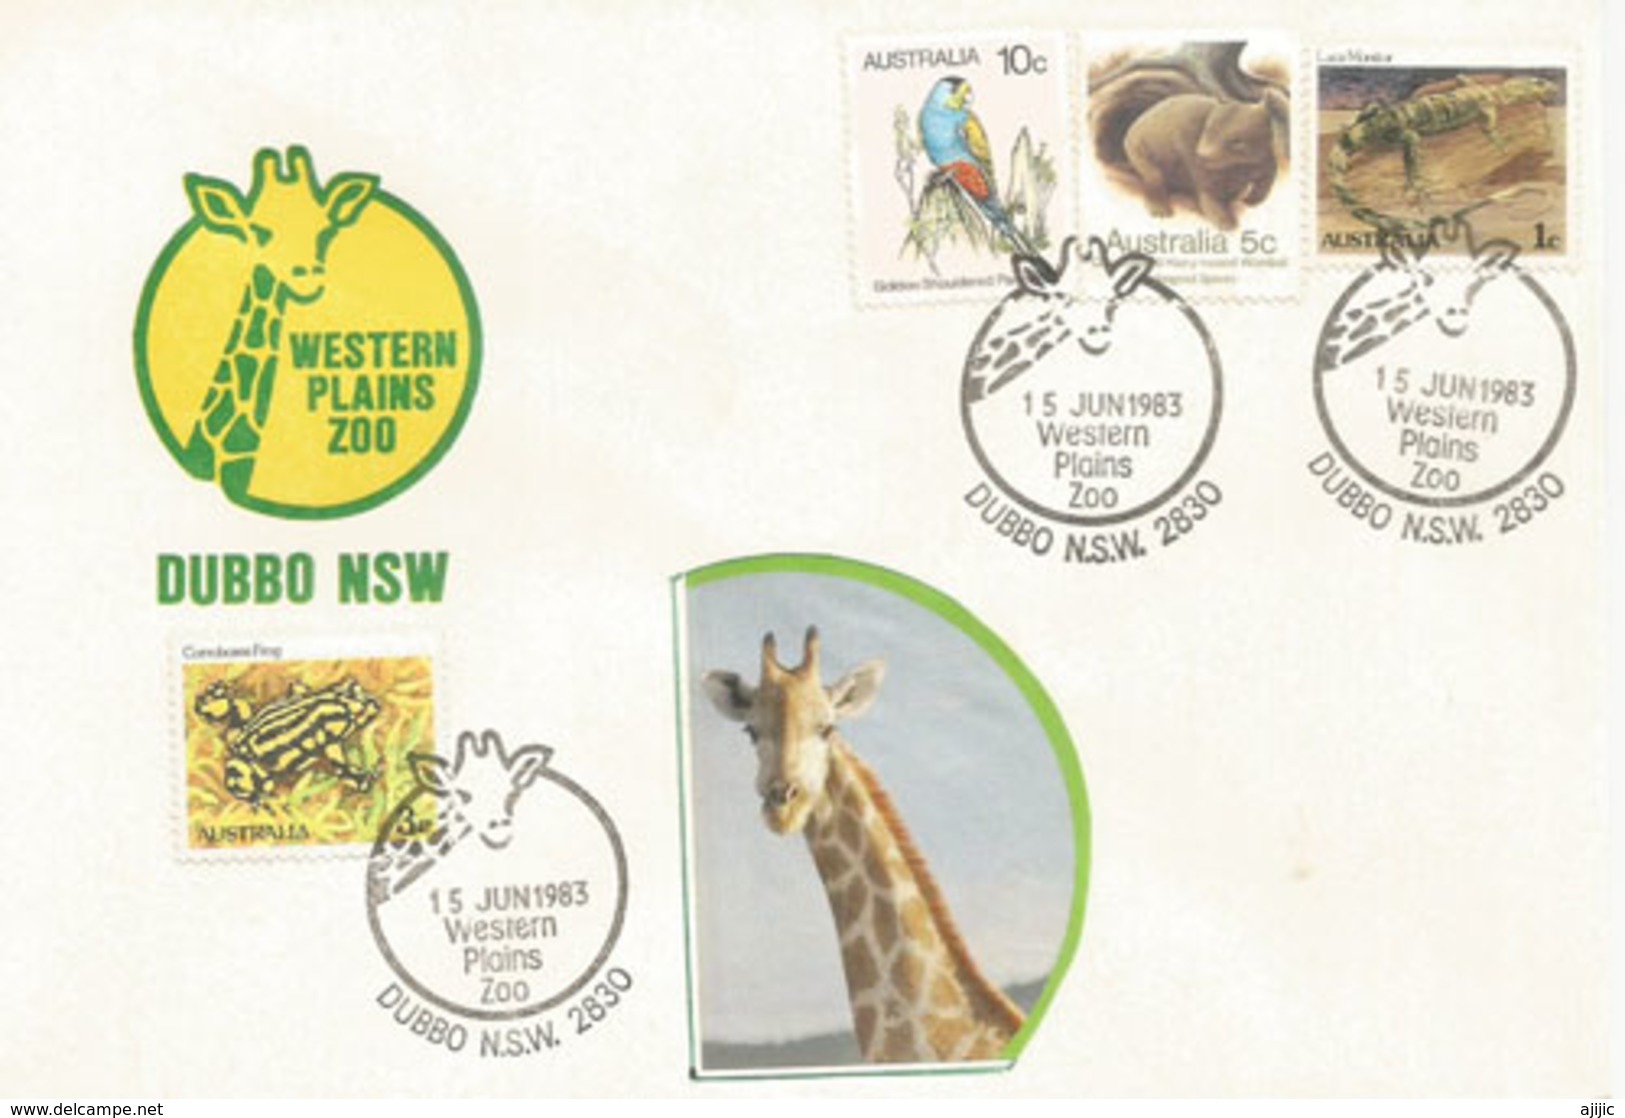 Taronga Western Plains Zoo Australia, Special Cover From The Zoo, With Australia Fauna + Girafe, Dubbo Postmark - Marcophilie